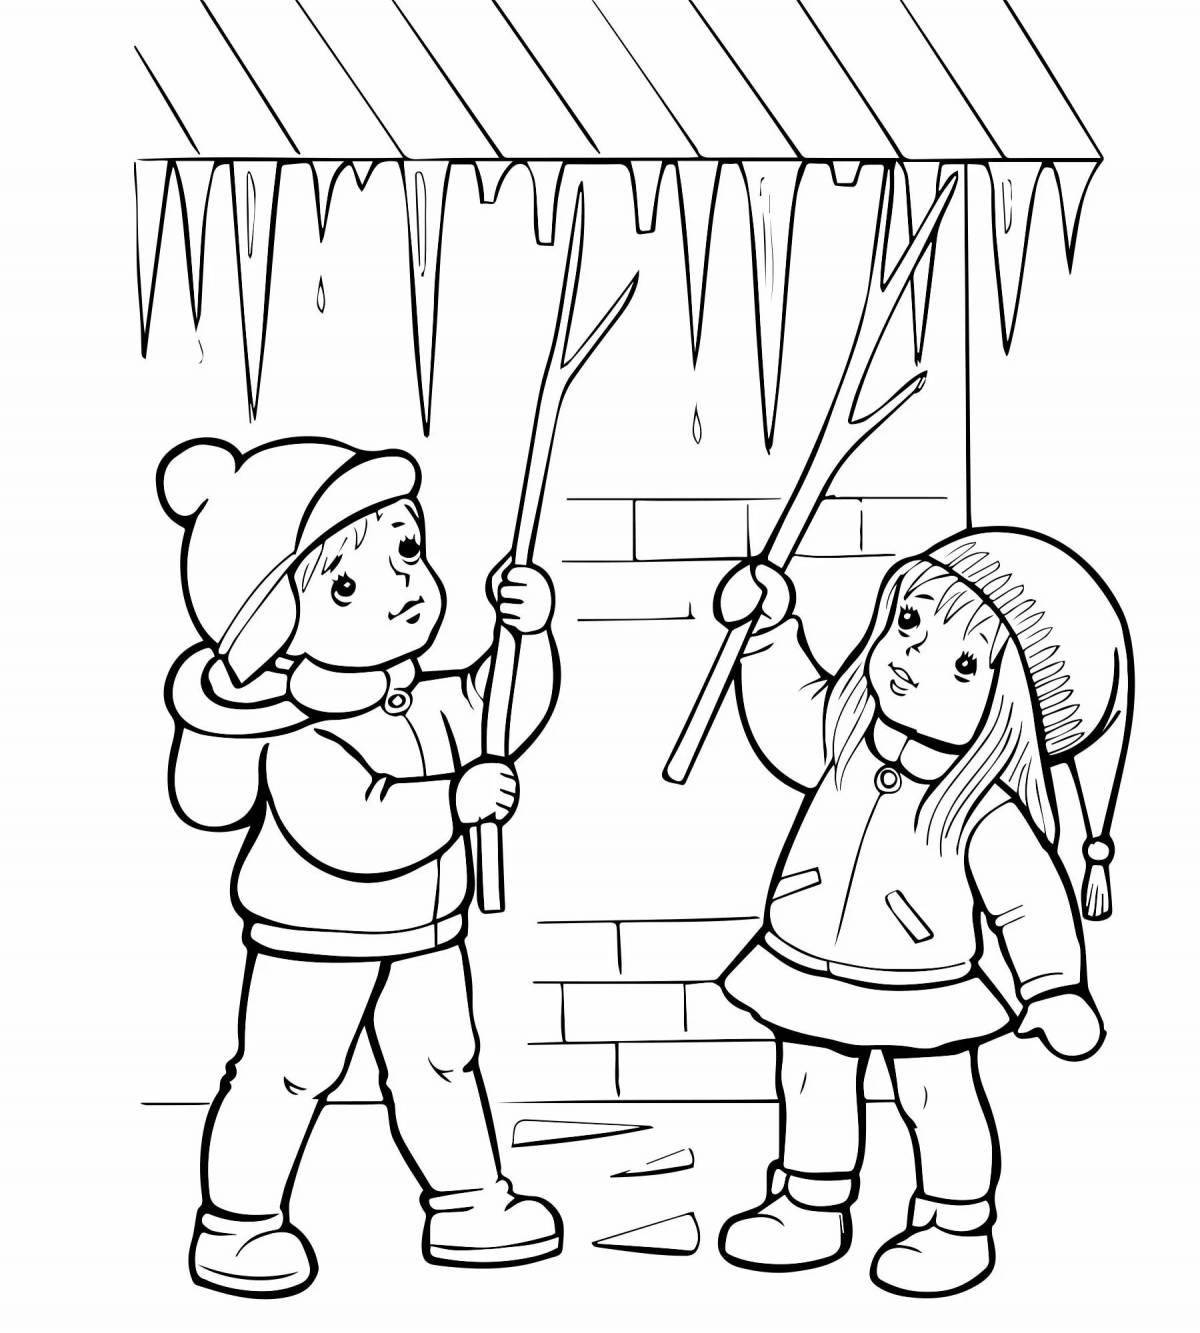 A fun spring coloring book for kids